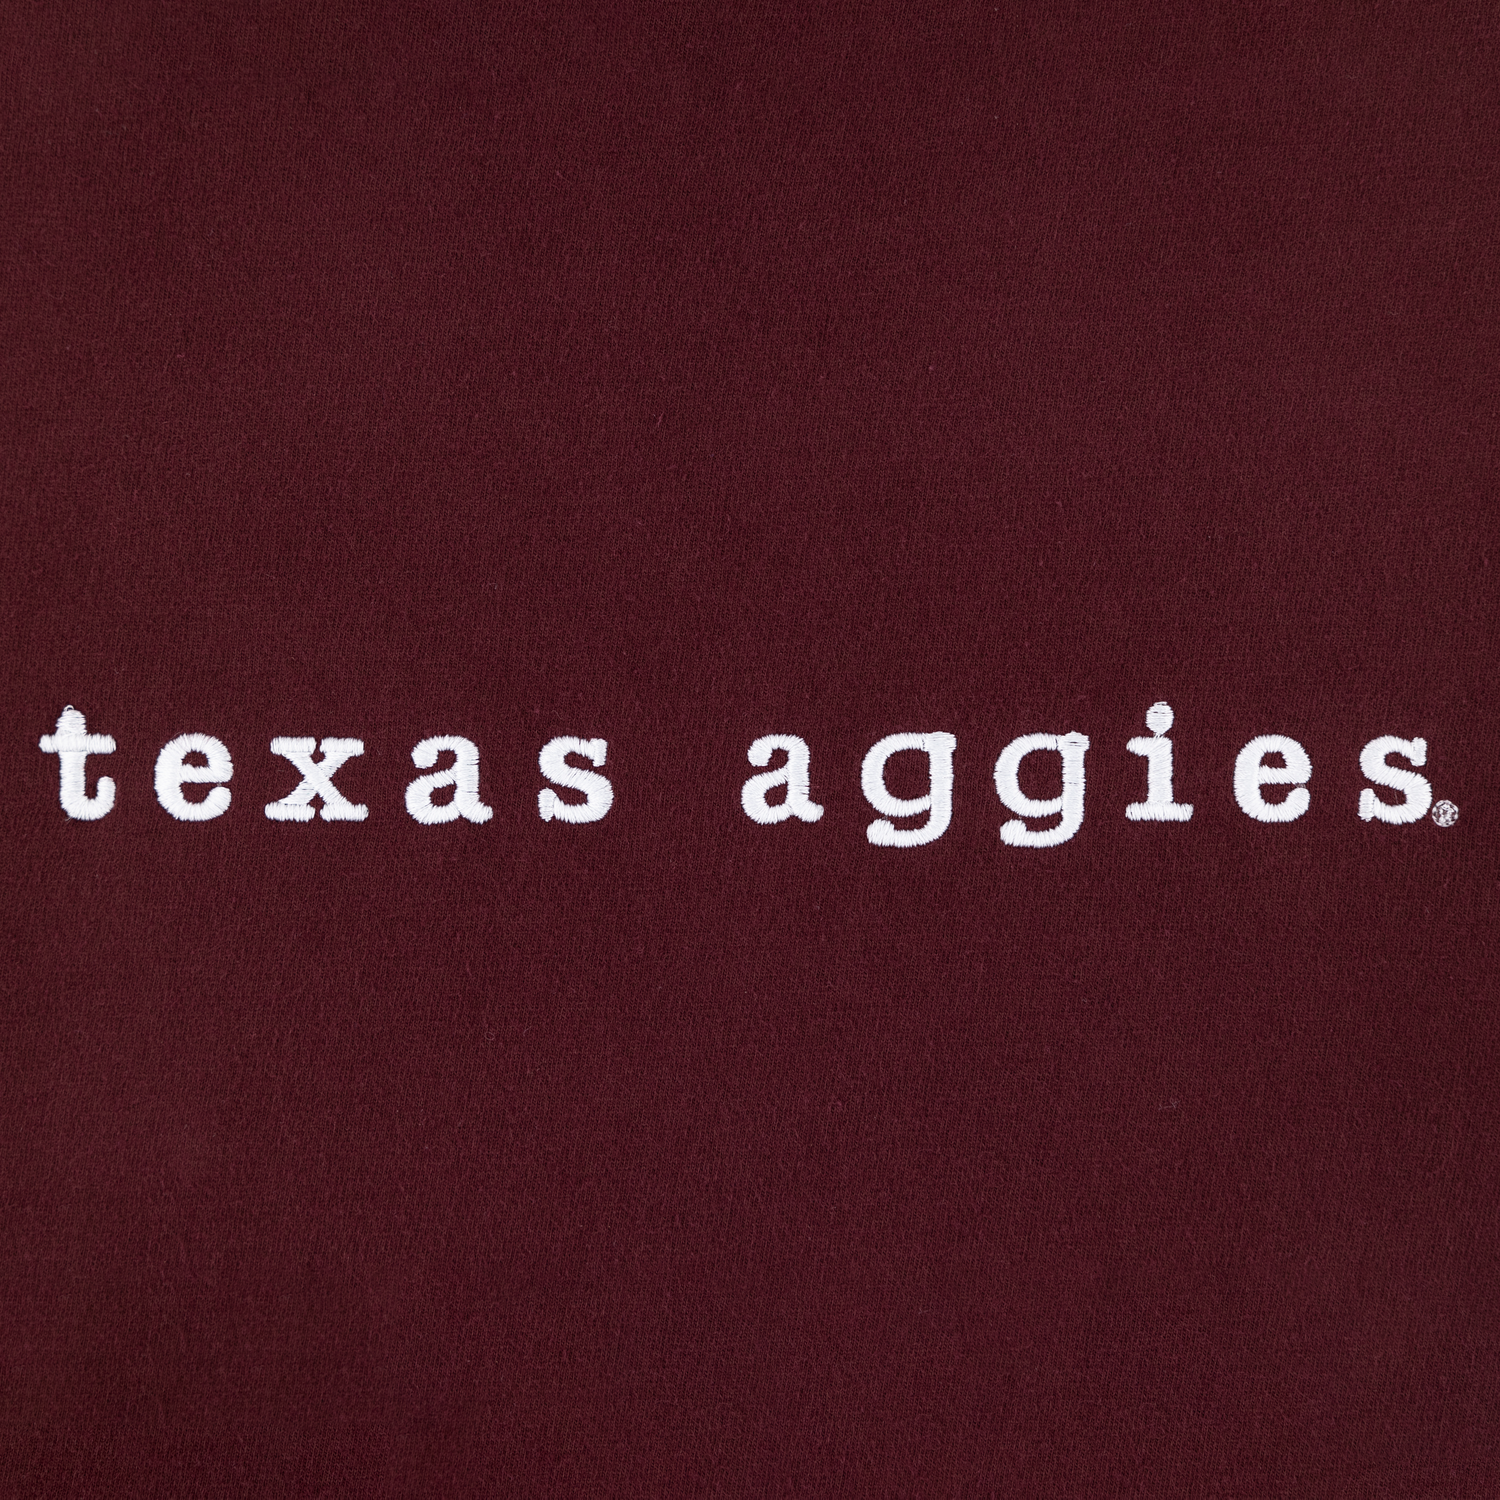 Texas Aggies Embroidered Maroon T-Shirts